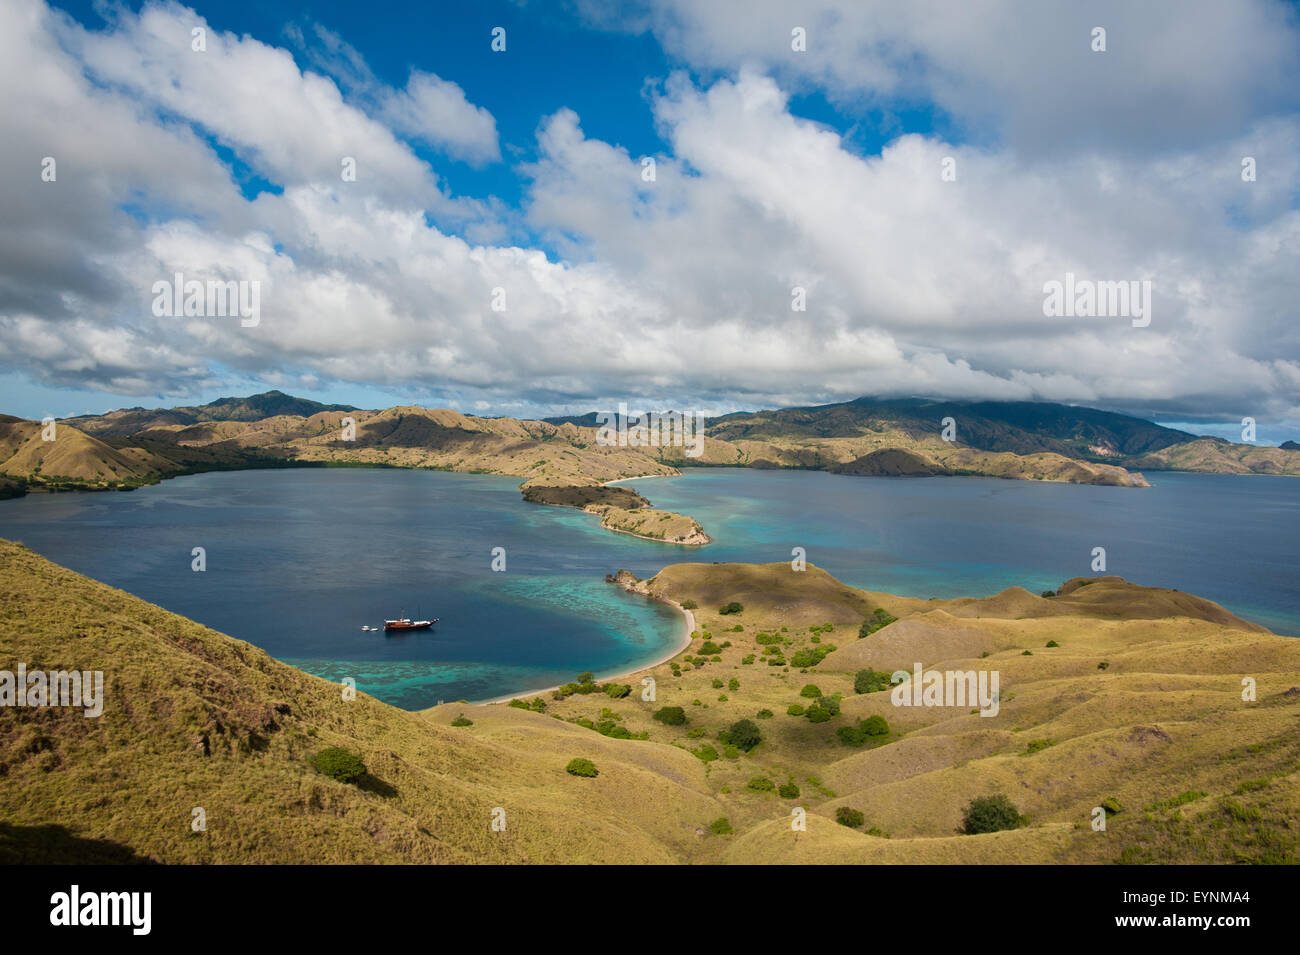 The view from the top of the mountain in North Komodo National Park overlooking the beautiful turquoise bay Stock Photo